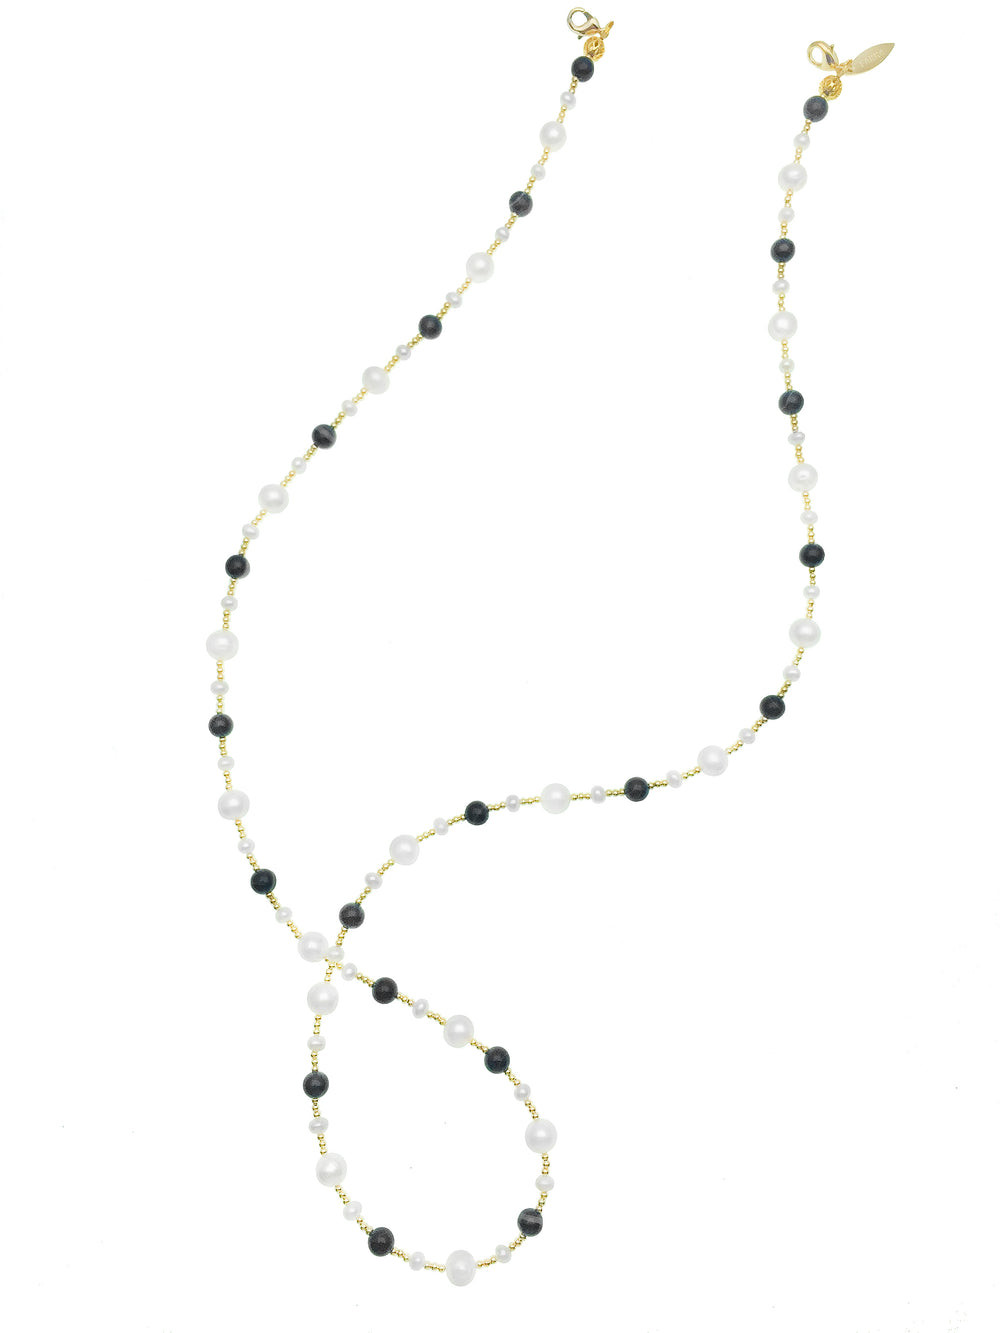 Removable Black &White Freshwater Pearls Glasses Chain Jewelry Accessories EC003 - FARRA